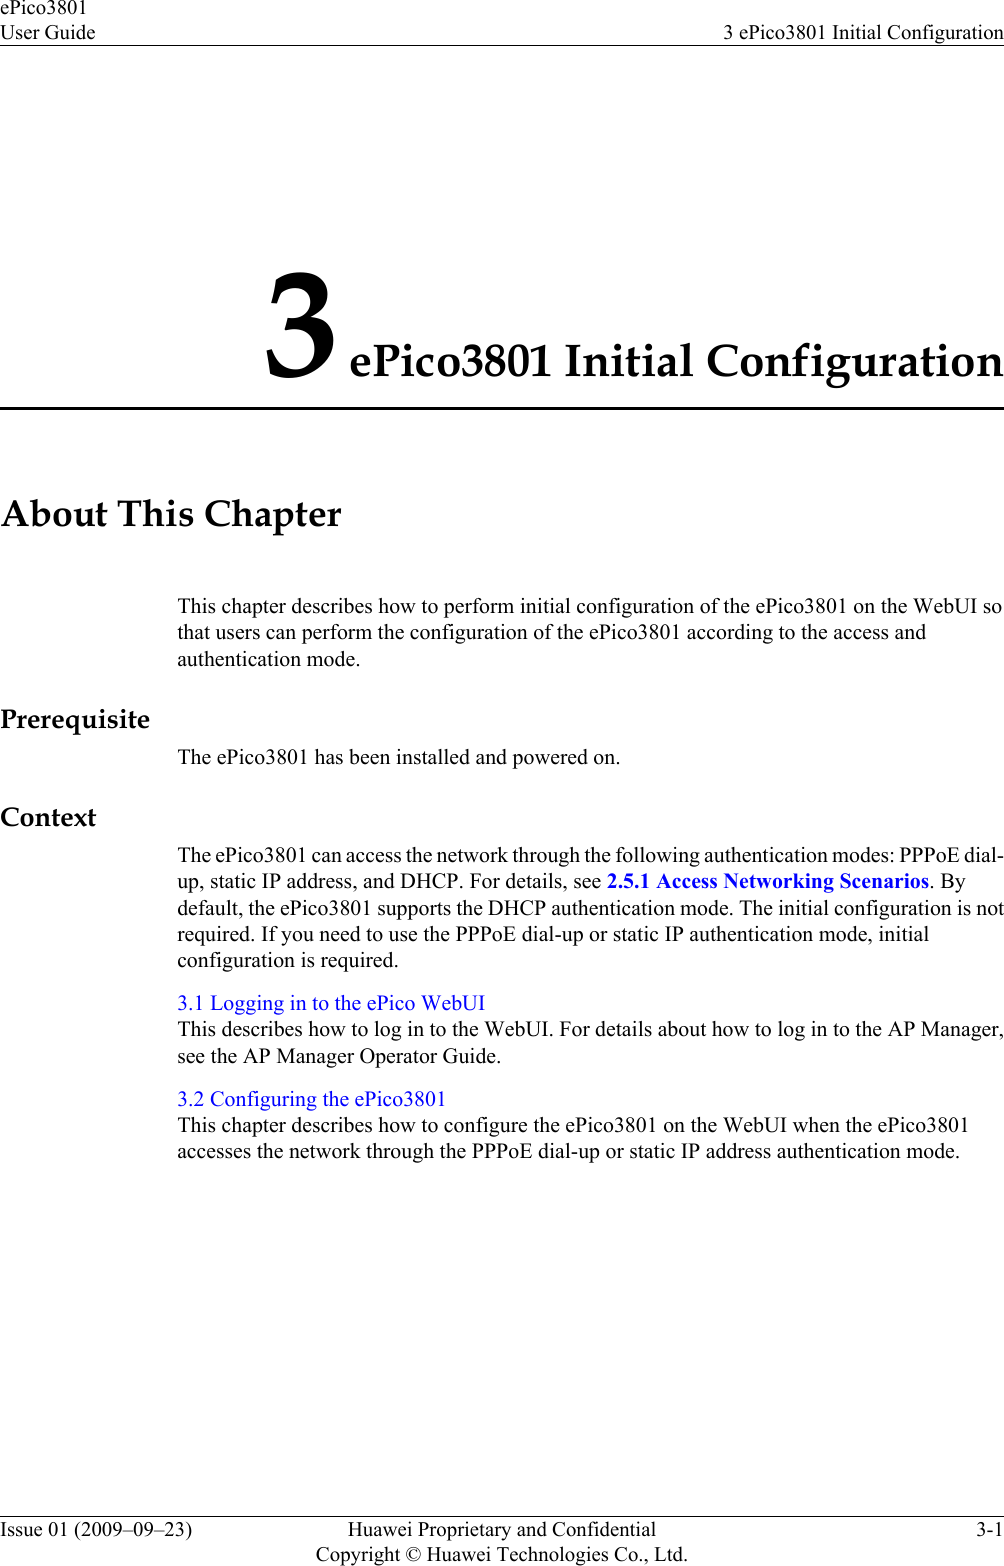 3 ePico3801 Initial ConfigurationAbout This ChapterThis chapter describes how to perform initial configuration of the ePico3801 on the WebUI sothat users can perform the configuration of the ePico3801 according to the access andauthentication mode.PrerequisiteThe ePico3801 has been installed and powered on.ContextThe ePico3801 can access the network through the following authentication modes: PPPoE dial-up, static IP address, and DHCP. For details, see 2.5.1 Access Networking Scenarios. Bydefault, the ePico3801 supports the DHCP authentication mode. The initial configuration is notrequired. If you need to use the PPPoE dial-up or static IP authentication mode, initialconfiguration is required.3.1 Logging in to the ePico WebUIThis describes how to log in to the WebUI. For details about how to log in to the AP Manager,see the AP Manager Operator Guide.3.2 Configuring the ePico3801This chapter describes how to configure the ePico3801 on the WebUI when the ePico3801accesses the network through the PPPoE dial-up or static IP address authentication mode.ePico3801User Guide 3 ePico3801 Initial ConfigurationIssue 01 (2009–09–23) Huawei Proprietary and ConfidentialCopyright © Huawei Technologies Co., Ltd.3-1